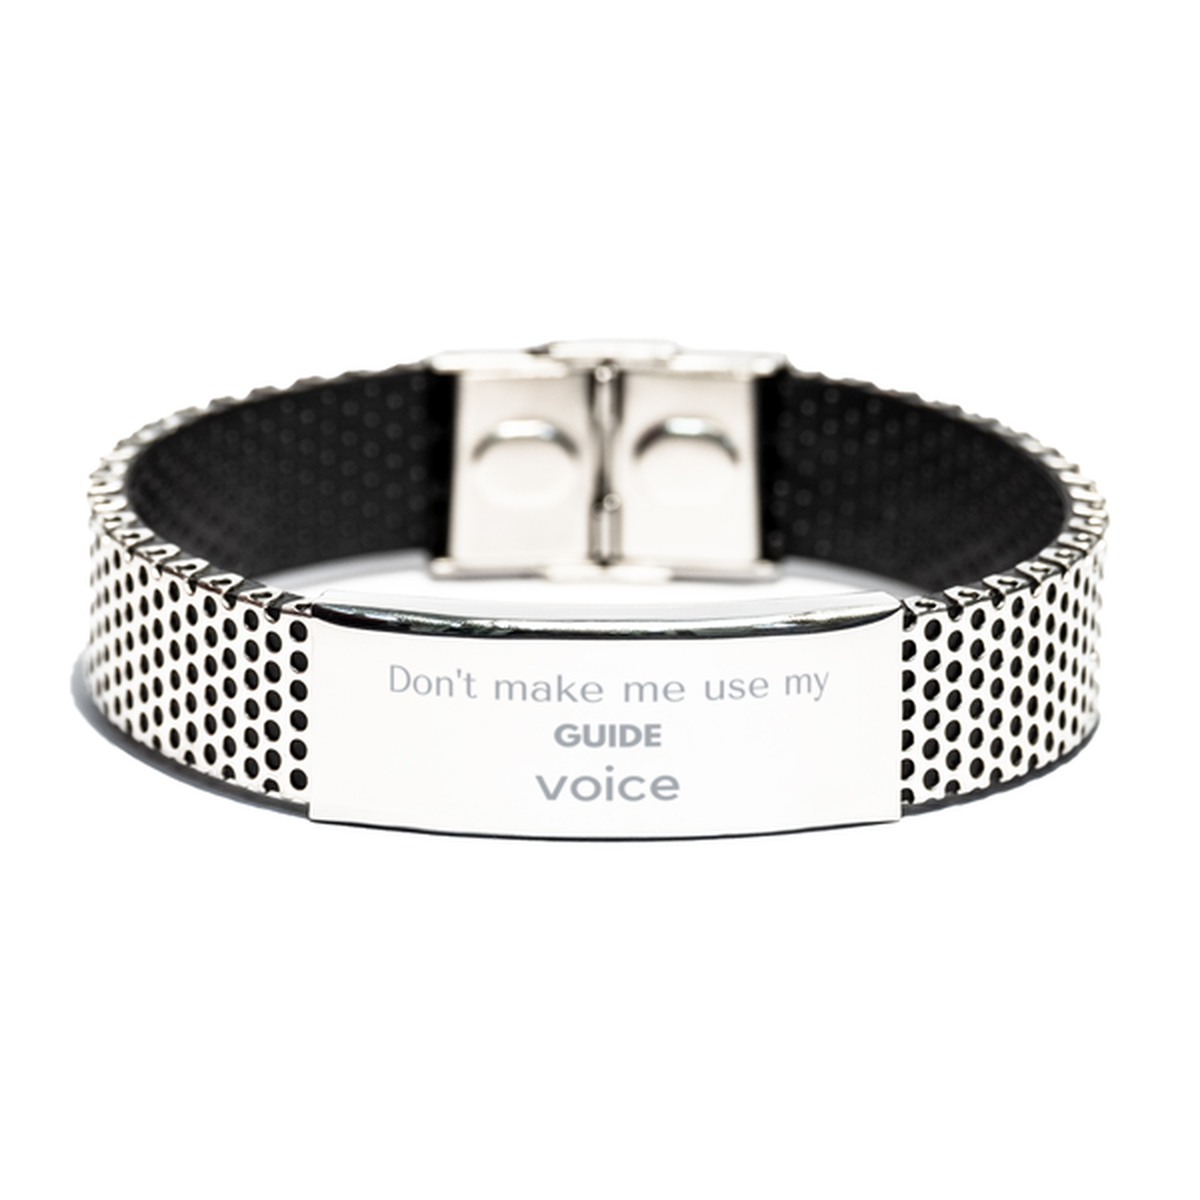 Don't make me use my Guide voice, Sarcasm Guide Gifts, Christmas Guide Stainless Steel Bracelet Birthday Unique Gifts For Guide Coworkers, Men, Women, Colleague, Friends